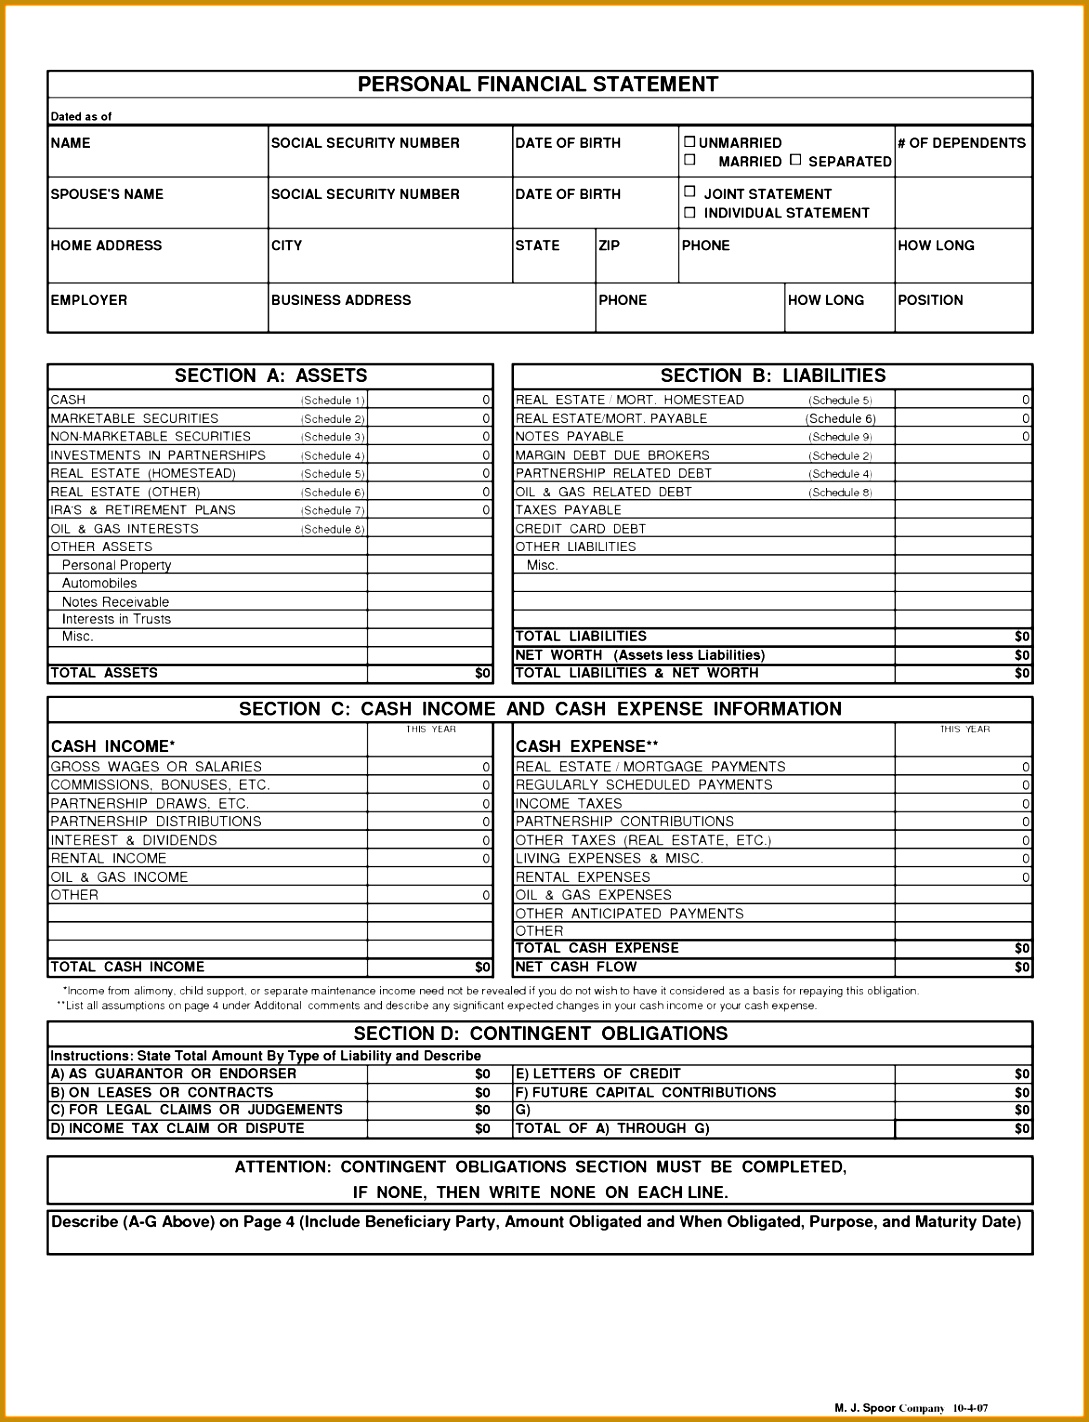 personal financial statements templates personal financial statement template excel zmdstx5b 14221089